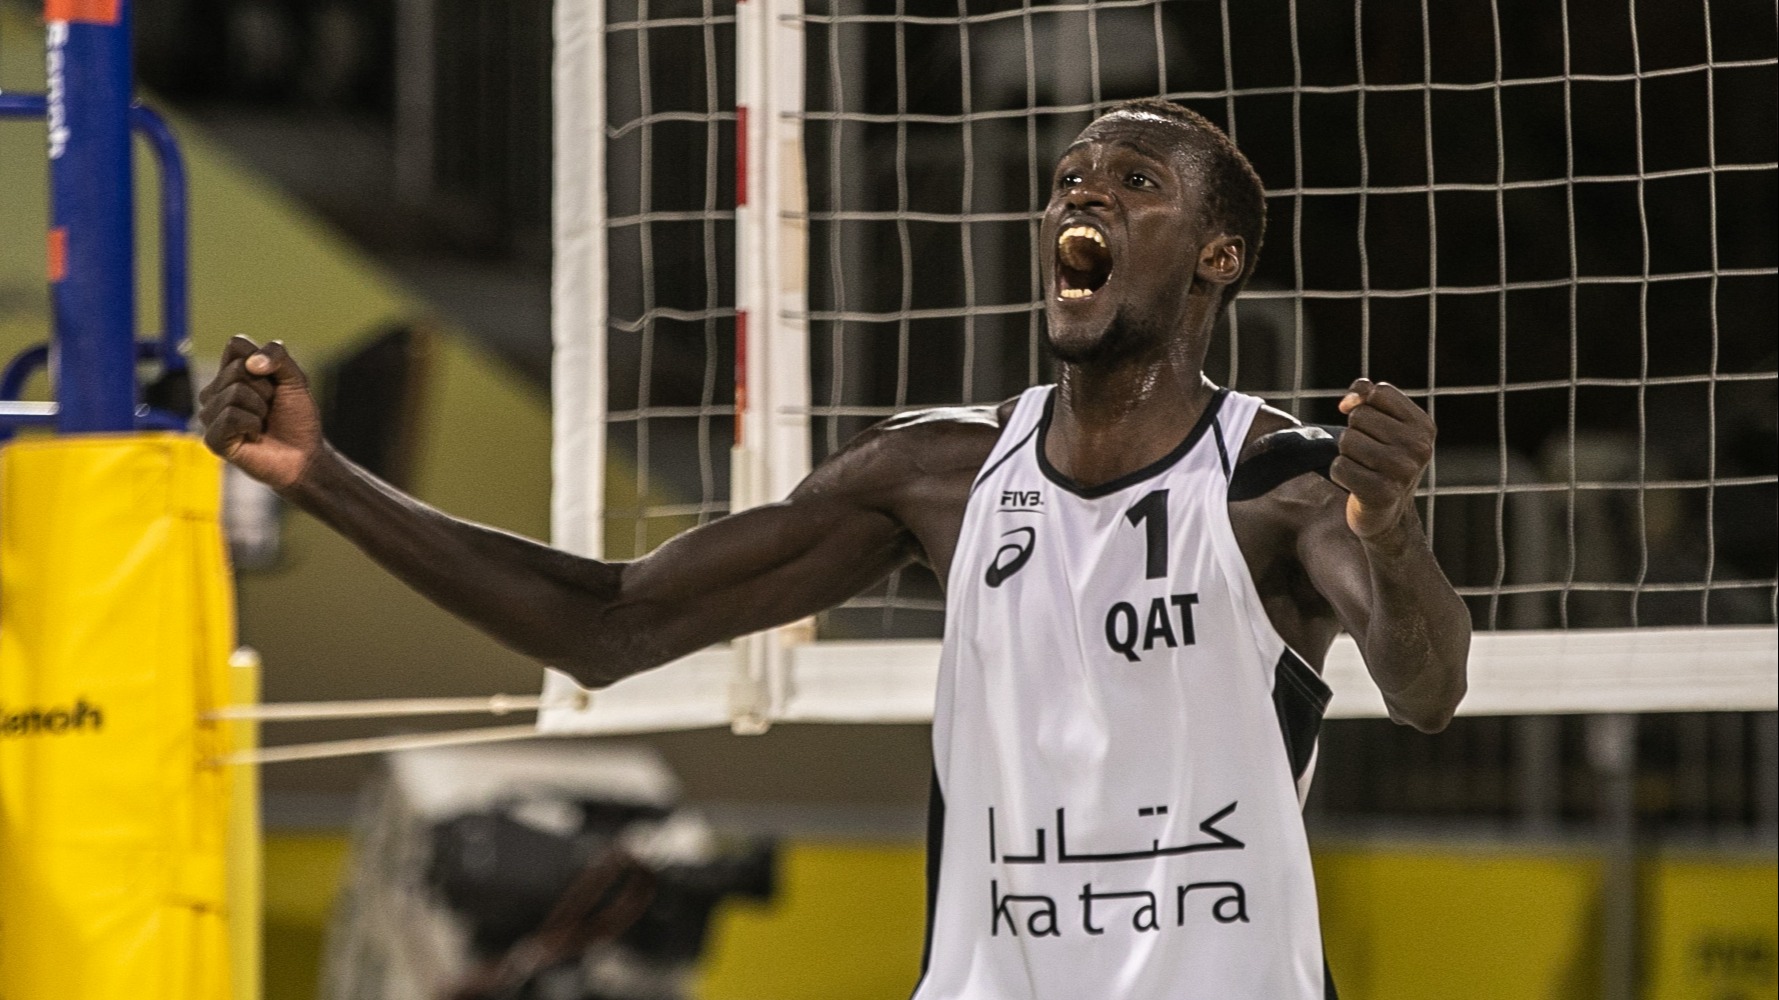 CHERIF: FROM DOHA TO CANCUN, AIMING FOR THE OLYMPICS